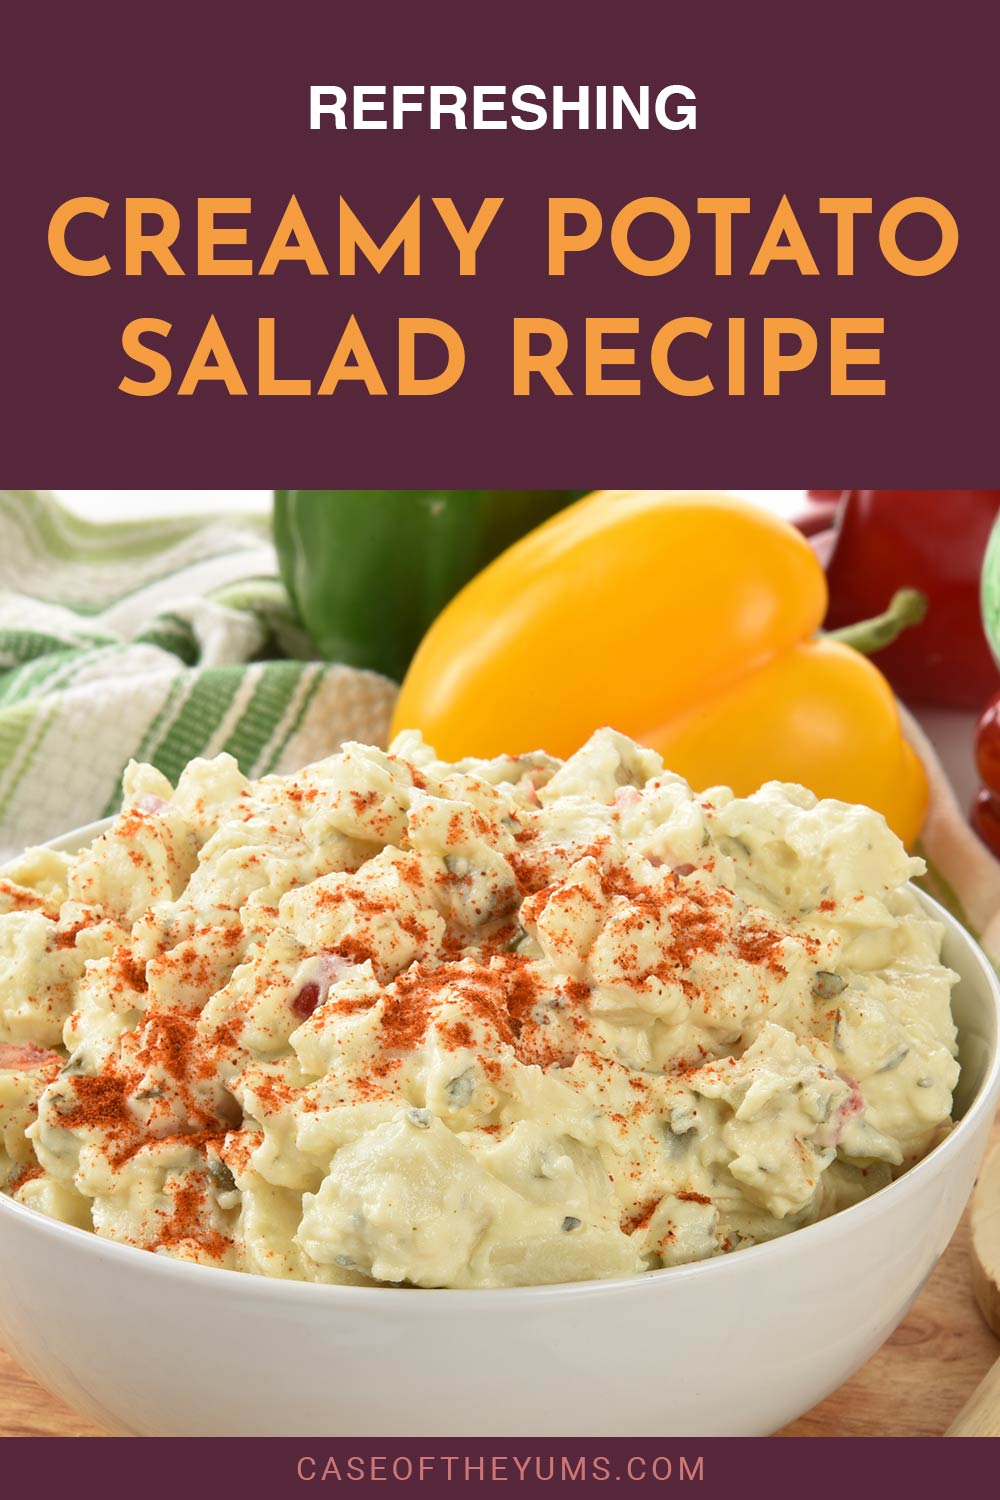 A white bowl full of smashed potato on wooden surface and capsicums besde it - Refreshing Creamy Potato Salad Recipe.